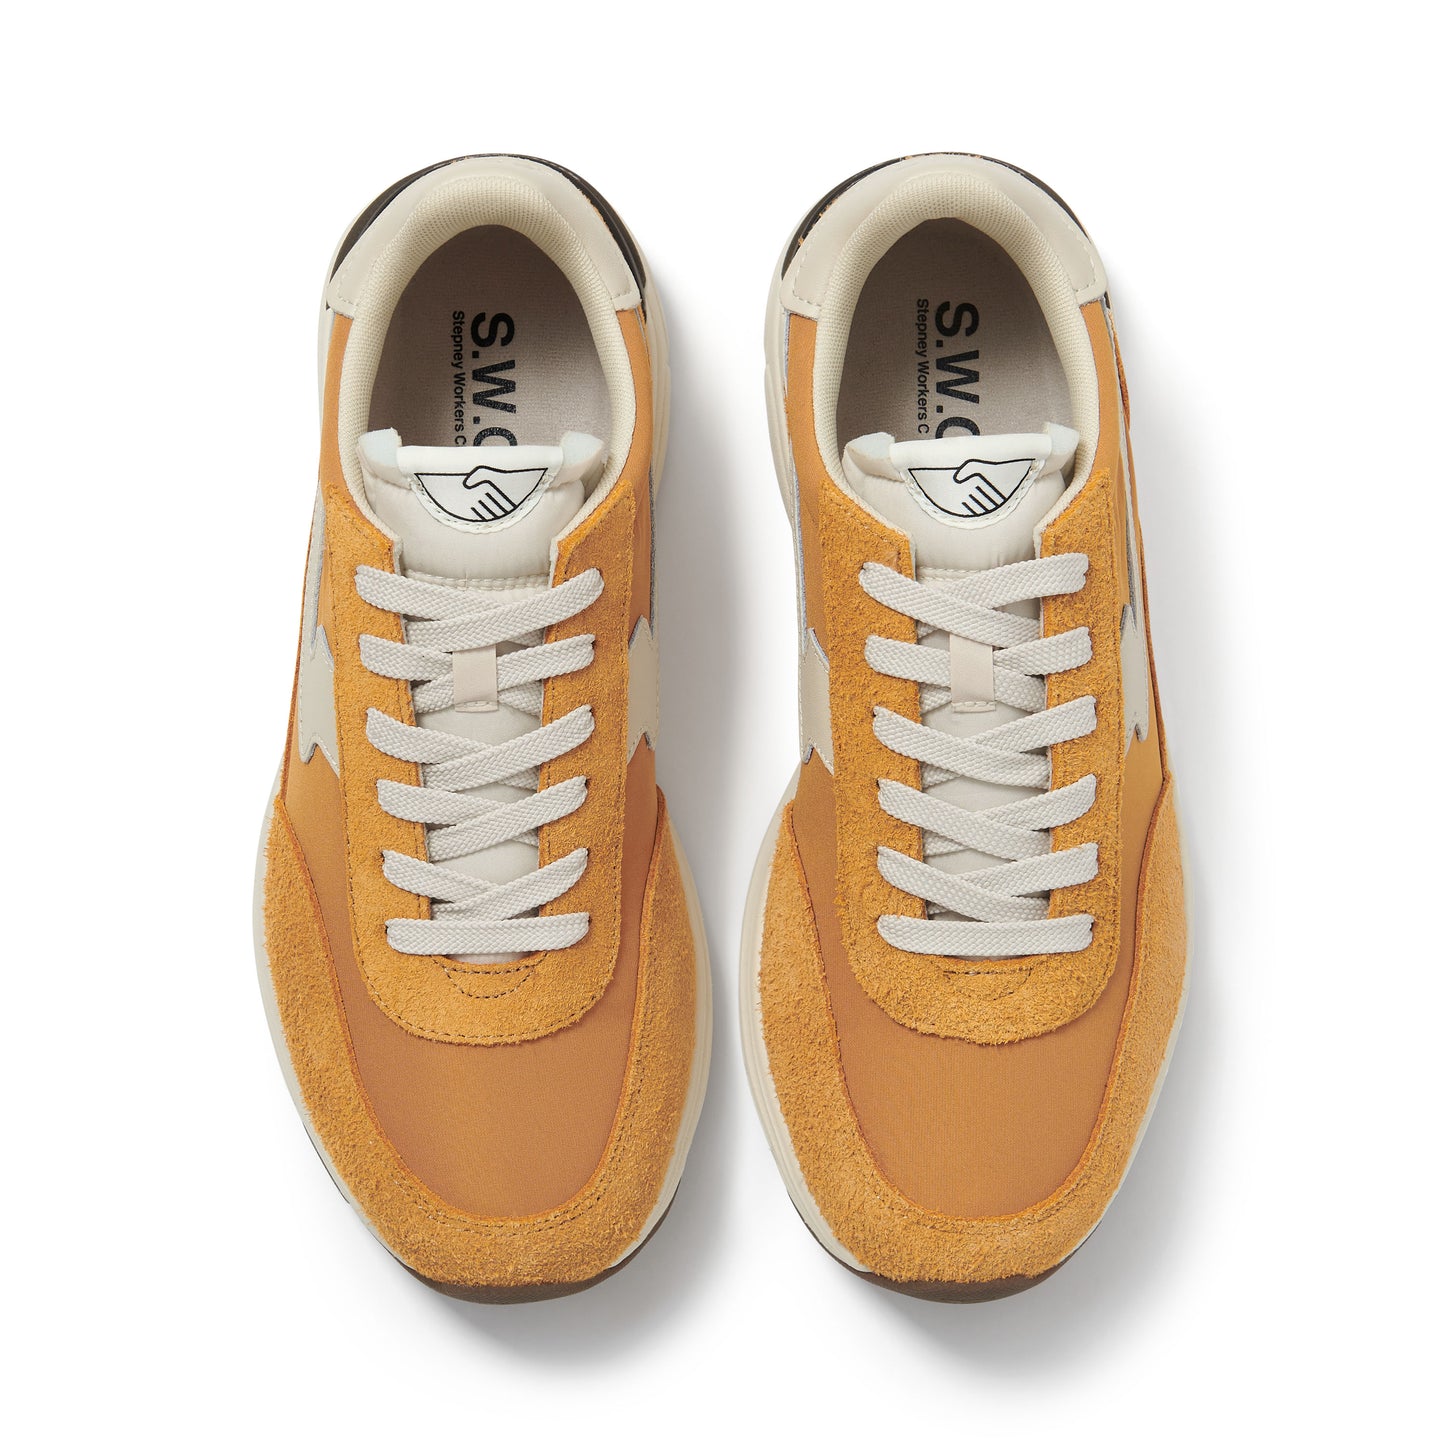 OSIER S-STRIKE SUEDE MIX COLLEGE YELLOW